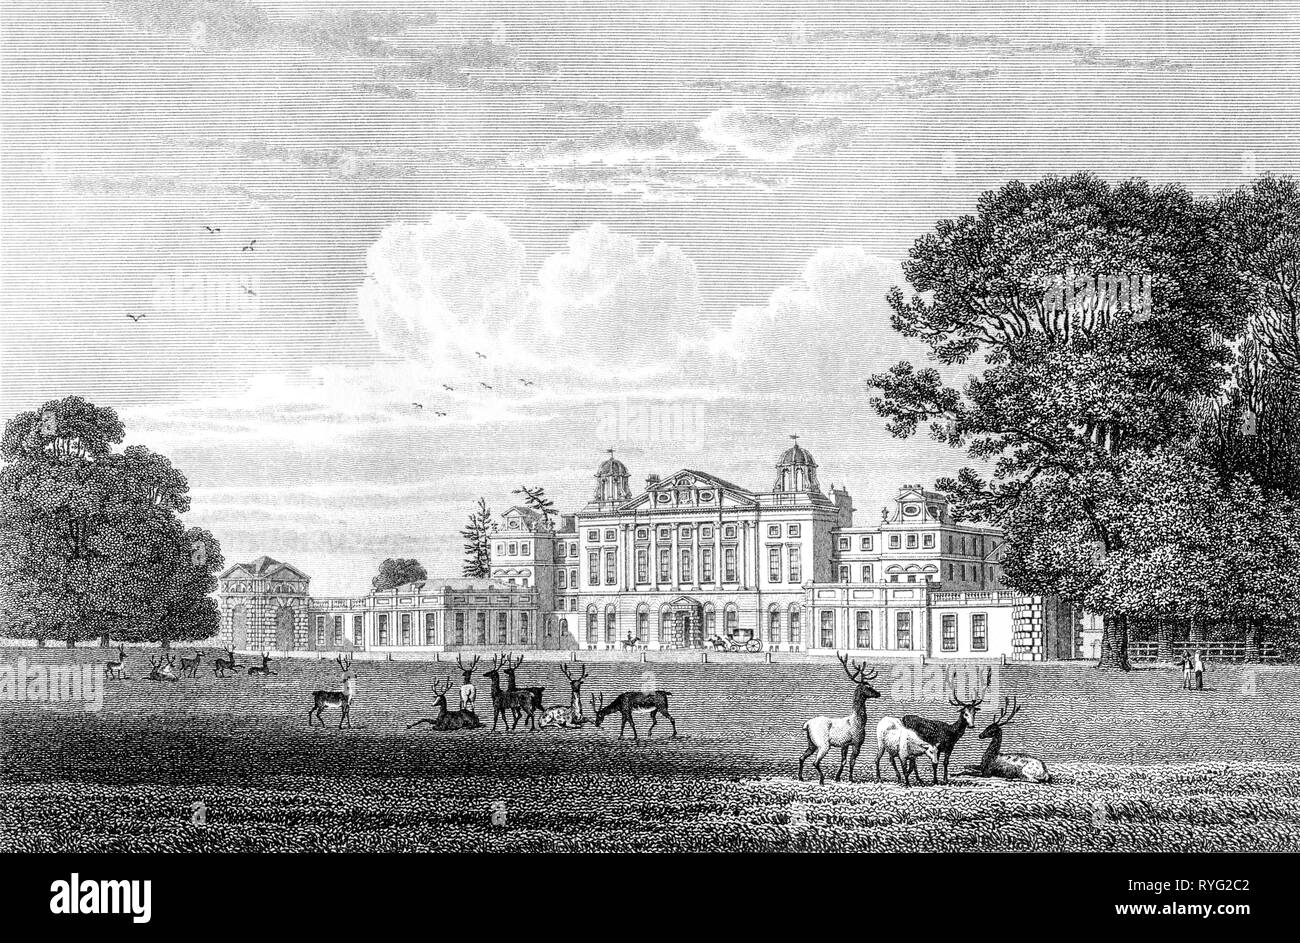 An engraving of Badminton House the Seat of the Duke of Beaufort, South Gloucestershire UK scanned at high resolution from a book published in 1825. Stock Photo